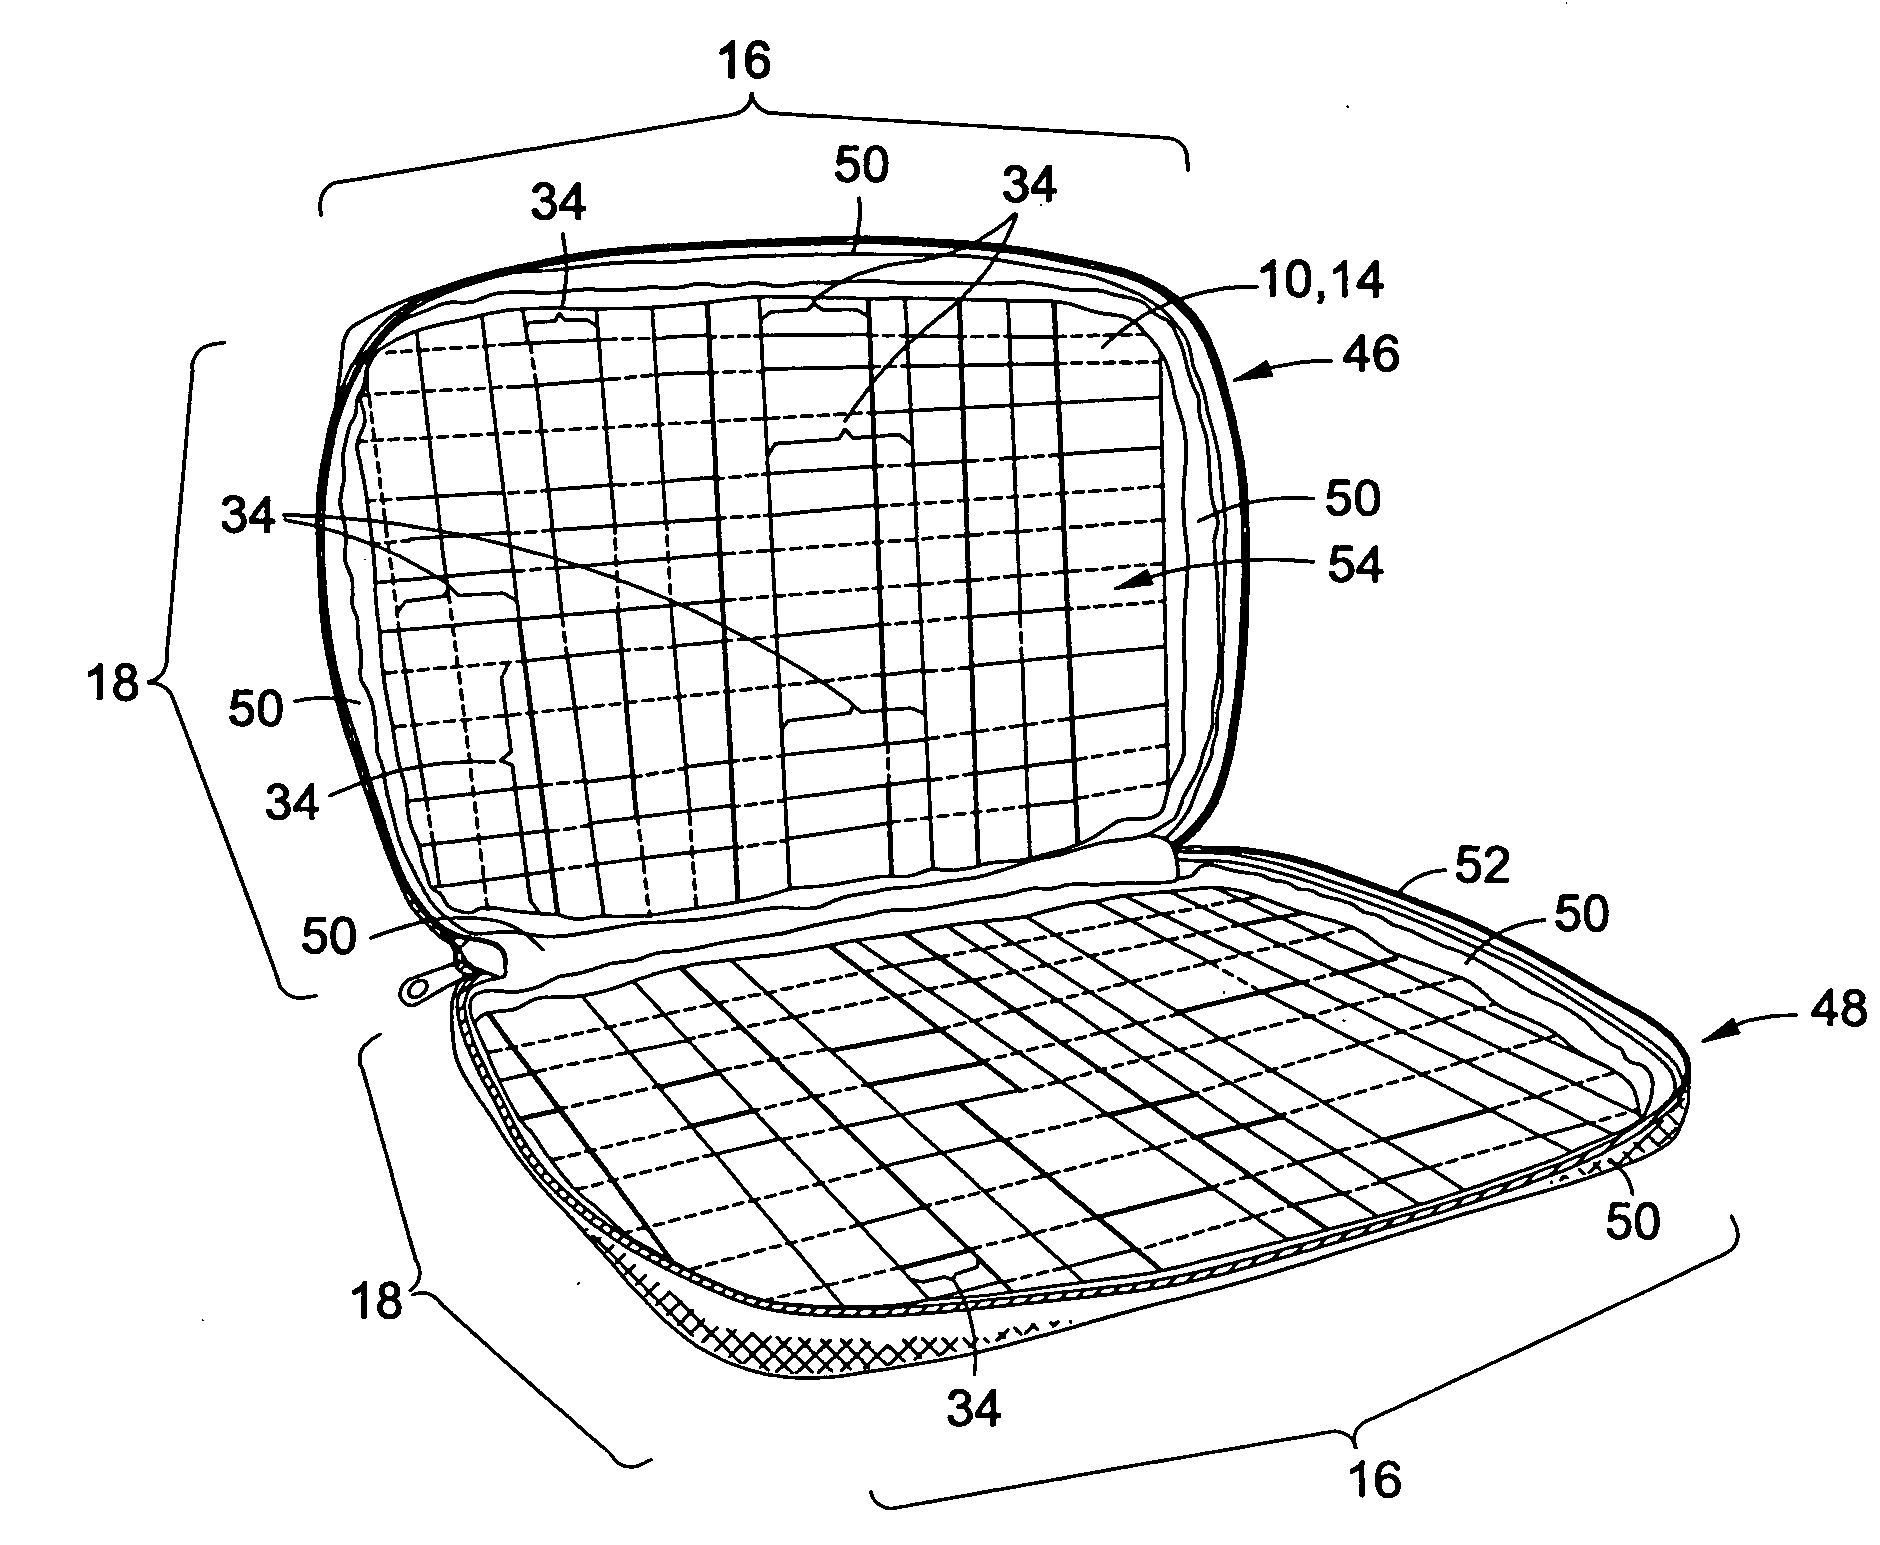 Universal object retention system and method of use